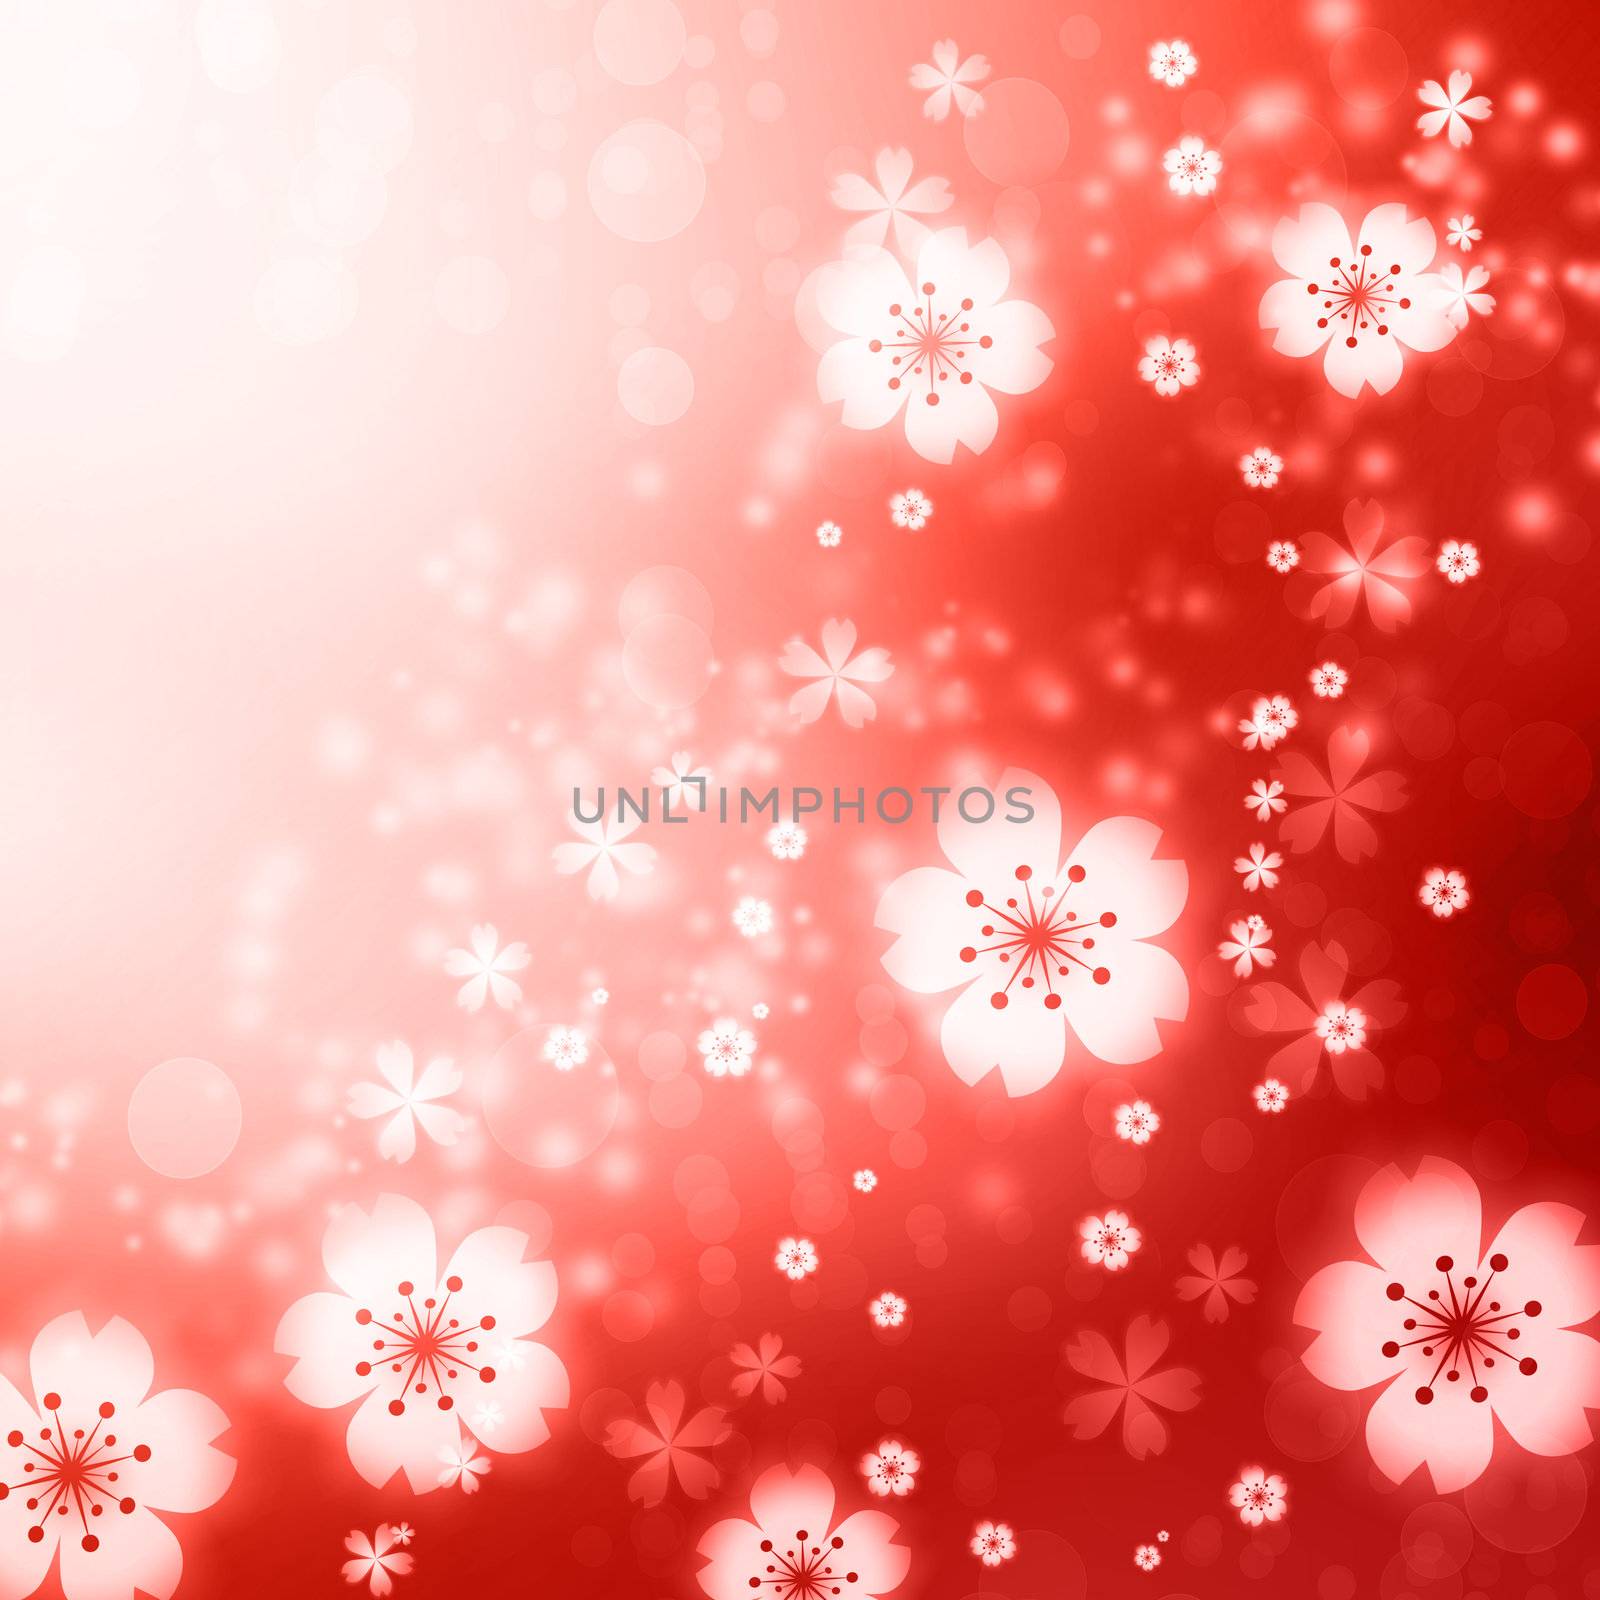 Red colored cherry blossoms background